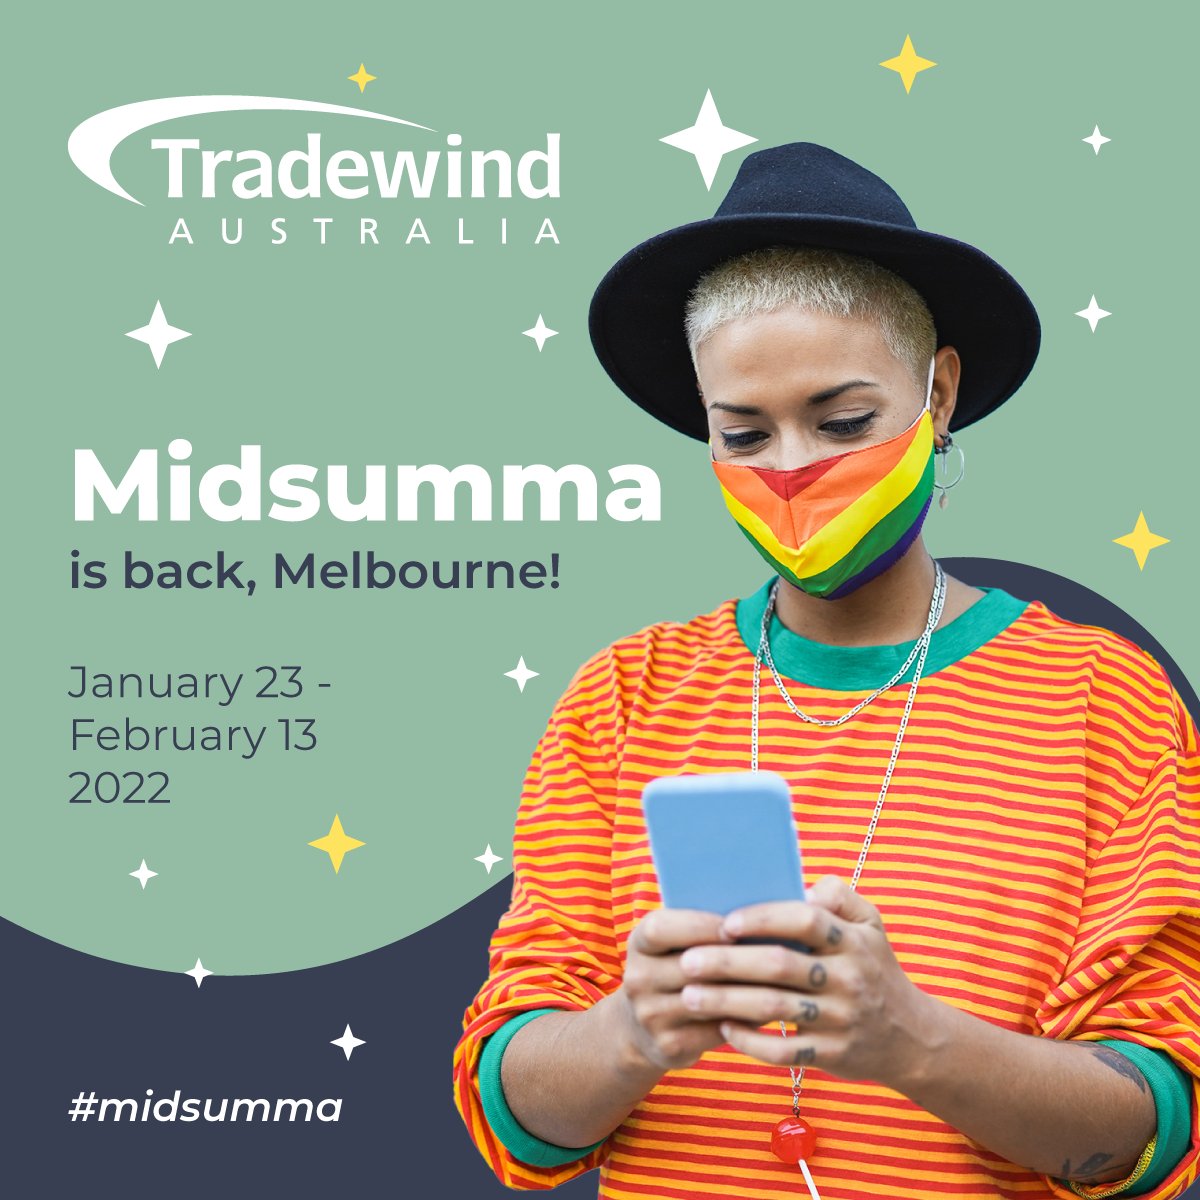 #Midsumma is back, Melbourne! 

The event runs over 22 days, from Jan 23 - Feb 13, involving local, interstate, and international artists. As Ally's, we will be hoping to see you down there! 🏳️‍🌈

Read more: midsumma.org.au/about/about-mi…

#Midsumma2022 #Ally #TradewindAustralia